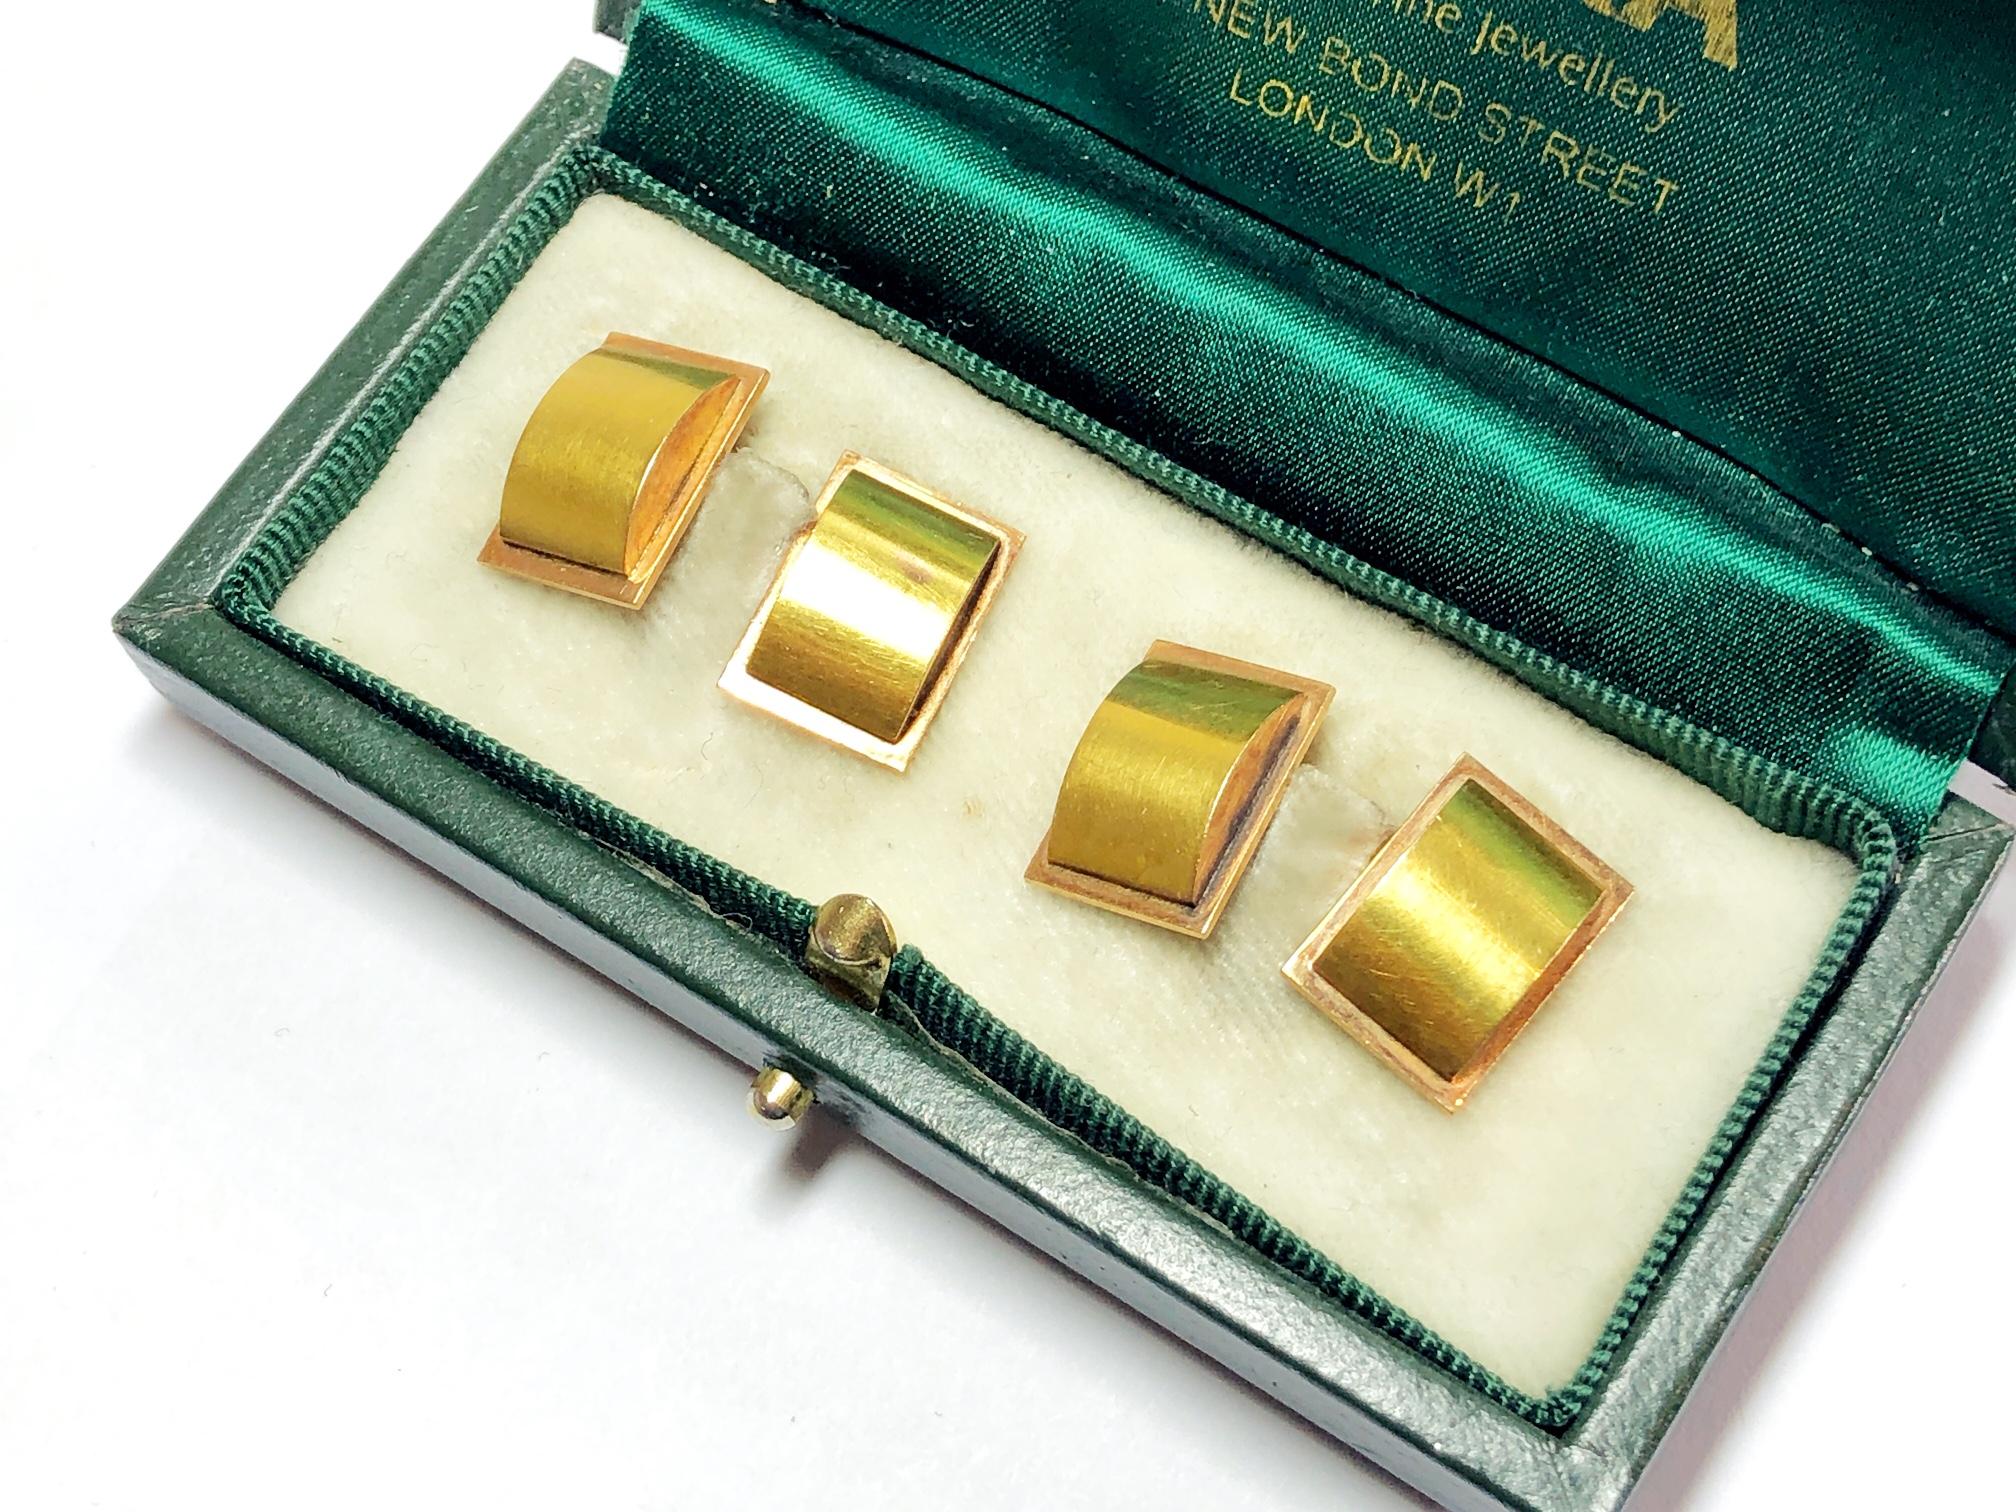 A pair of vintage, rectangular, two-colour gold cufflinks, with red gold rectangular back plates and yellow gold domed curves, circa 1945.